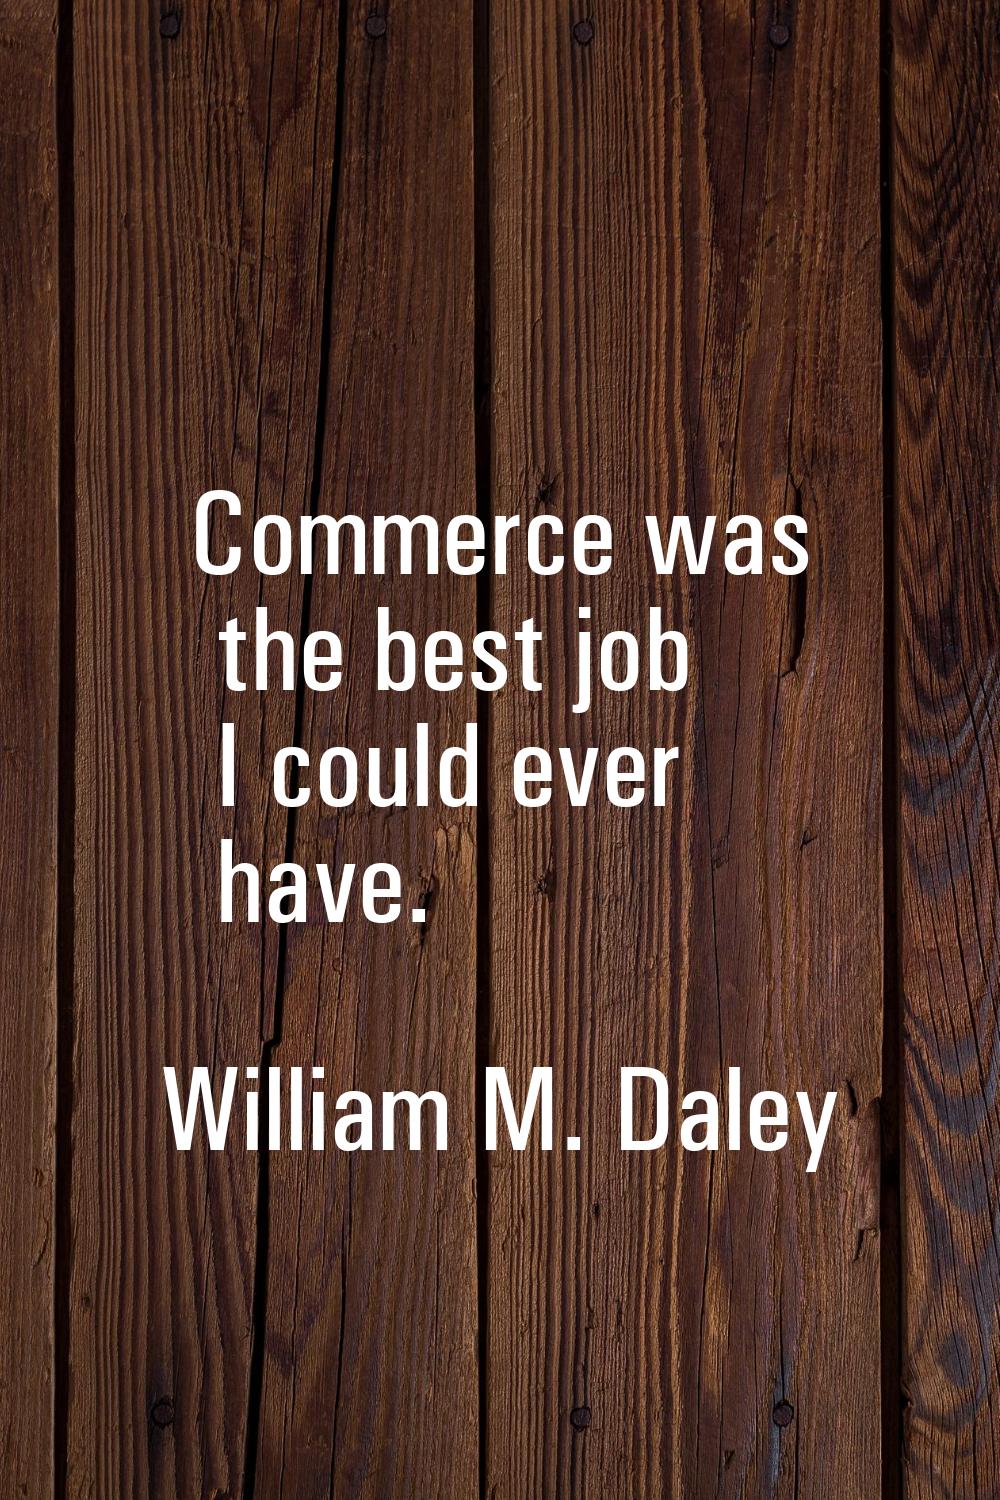 Commerce was the best job I could ever have.